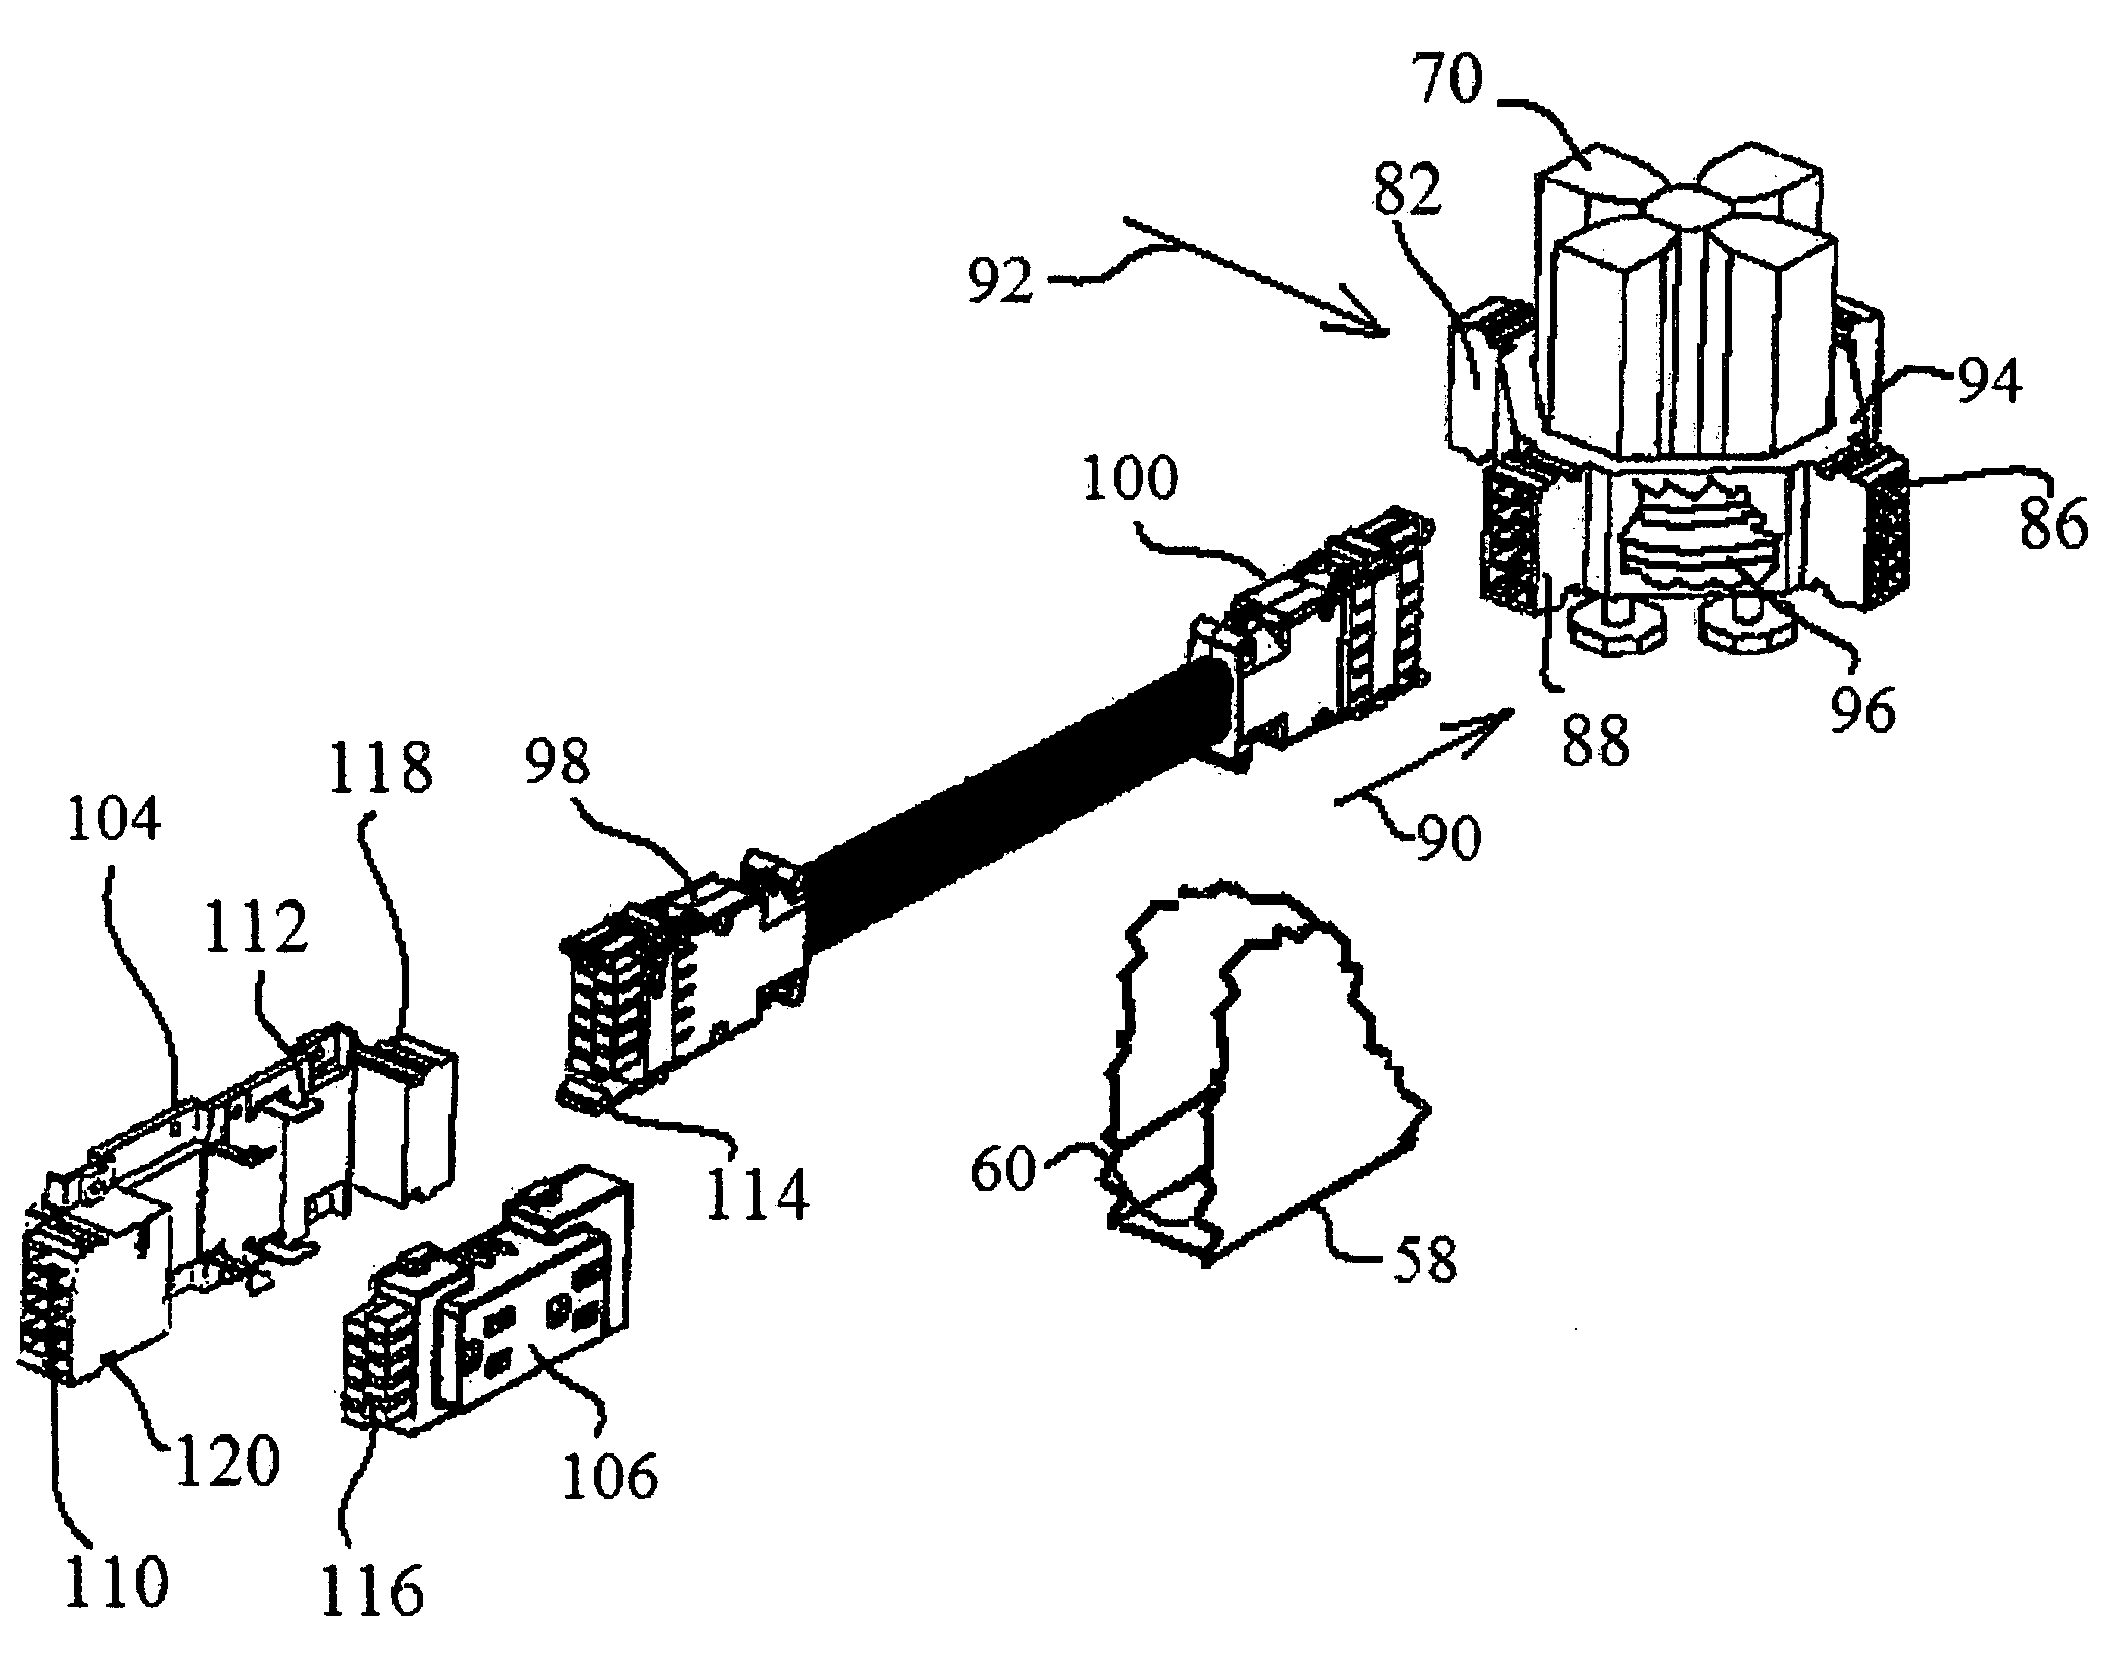 Method of branching power around an obstacle